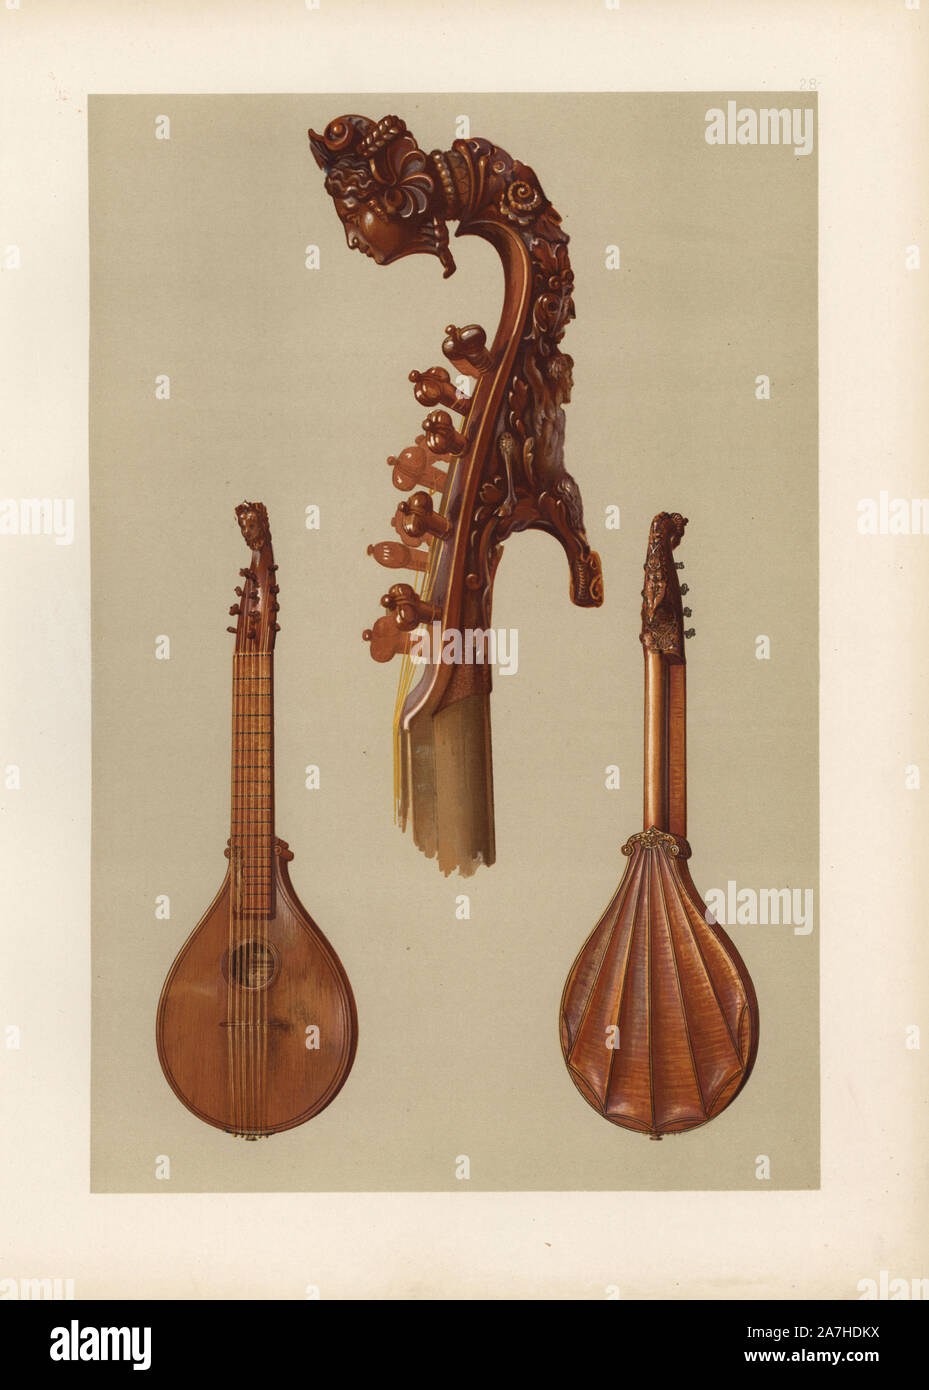 Rare cetera or cither with carved head made by famous violin-maker Antonius Stradivarius in 1700. Chromolithograph from an illustration by William Gibb from A.J. Hipkins' 'Musical Instruments, Historic, Rare and Unique,' Adam and Charles Black, Edinburgh, 1888. Alfred James Hipkins (1826-1903) was an English musicologist who specialized in the history of the pianoforte and other instruments. William Gibb was a master illustrator and chromolithographer and illustrated 'The Royal House of Stuart' (1890), 'Naval and Military Trophies' (1896), and others. Stock Photo